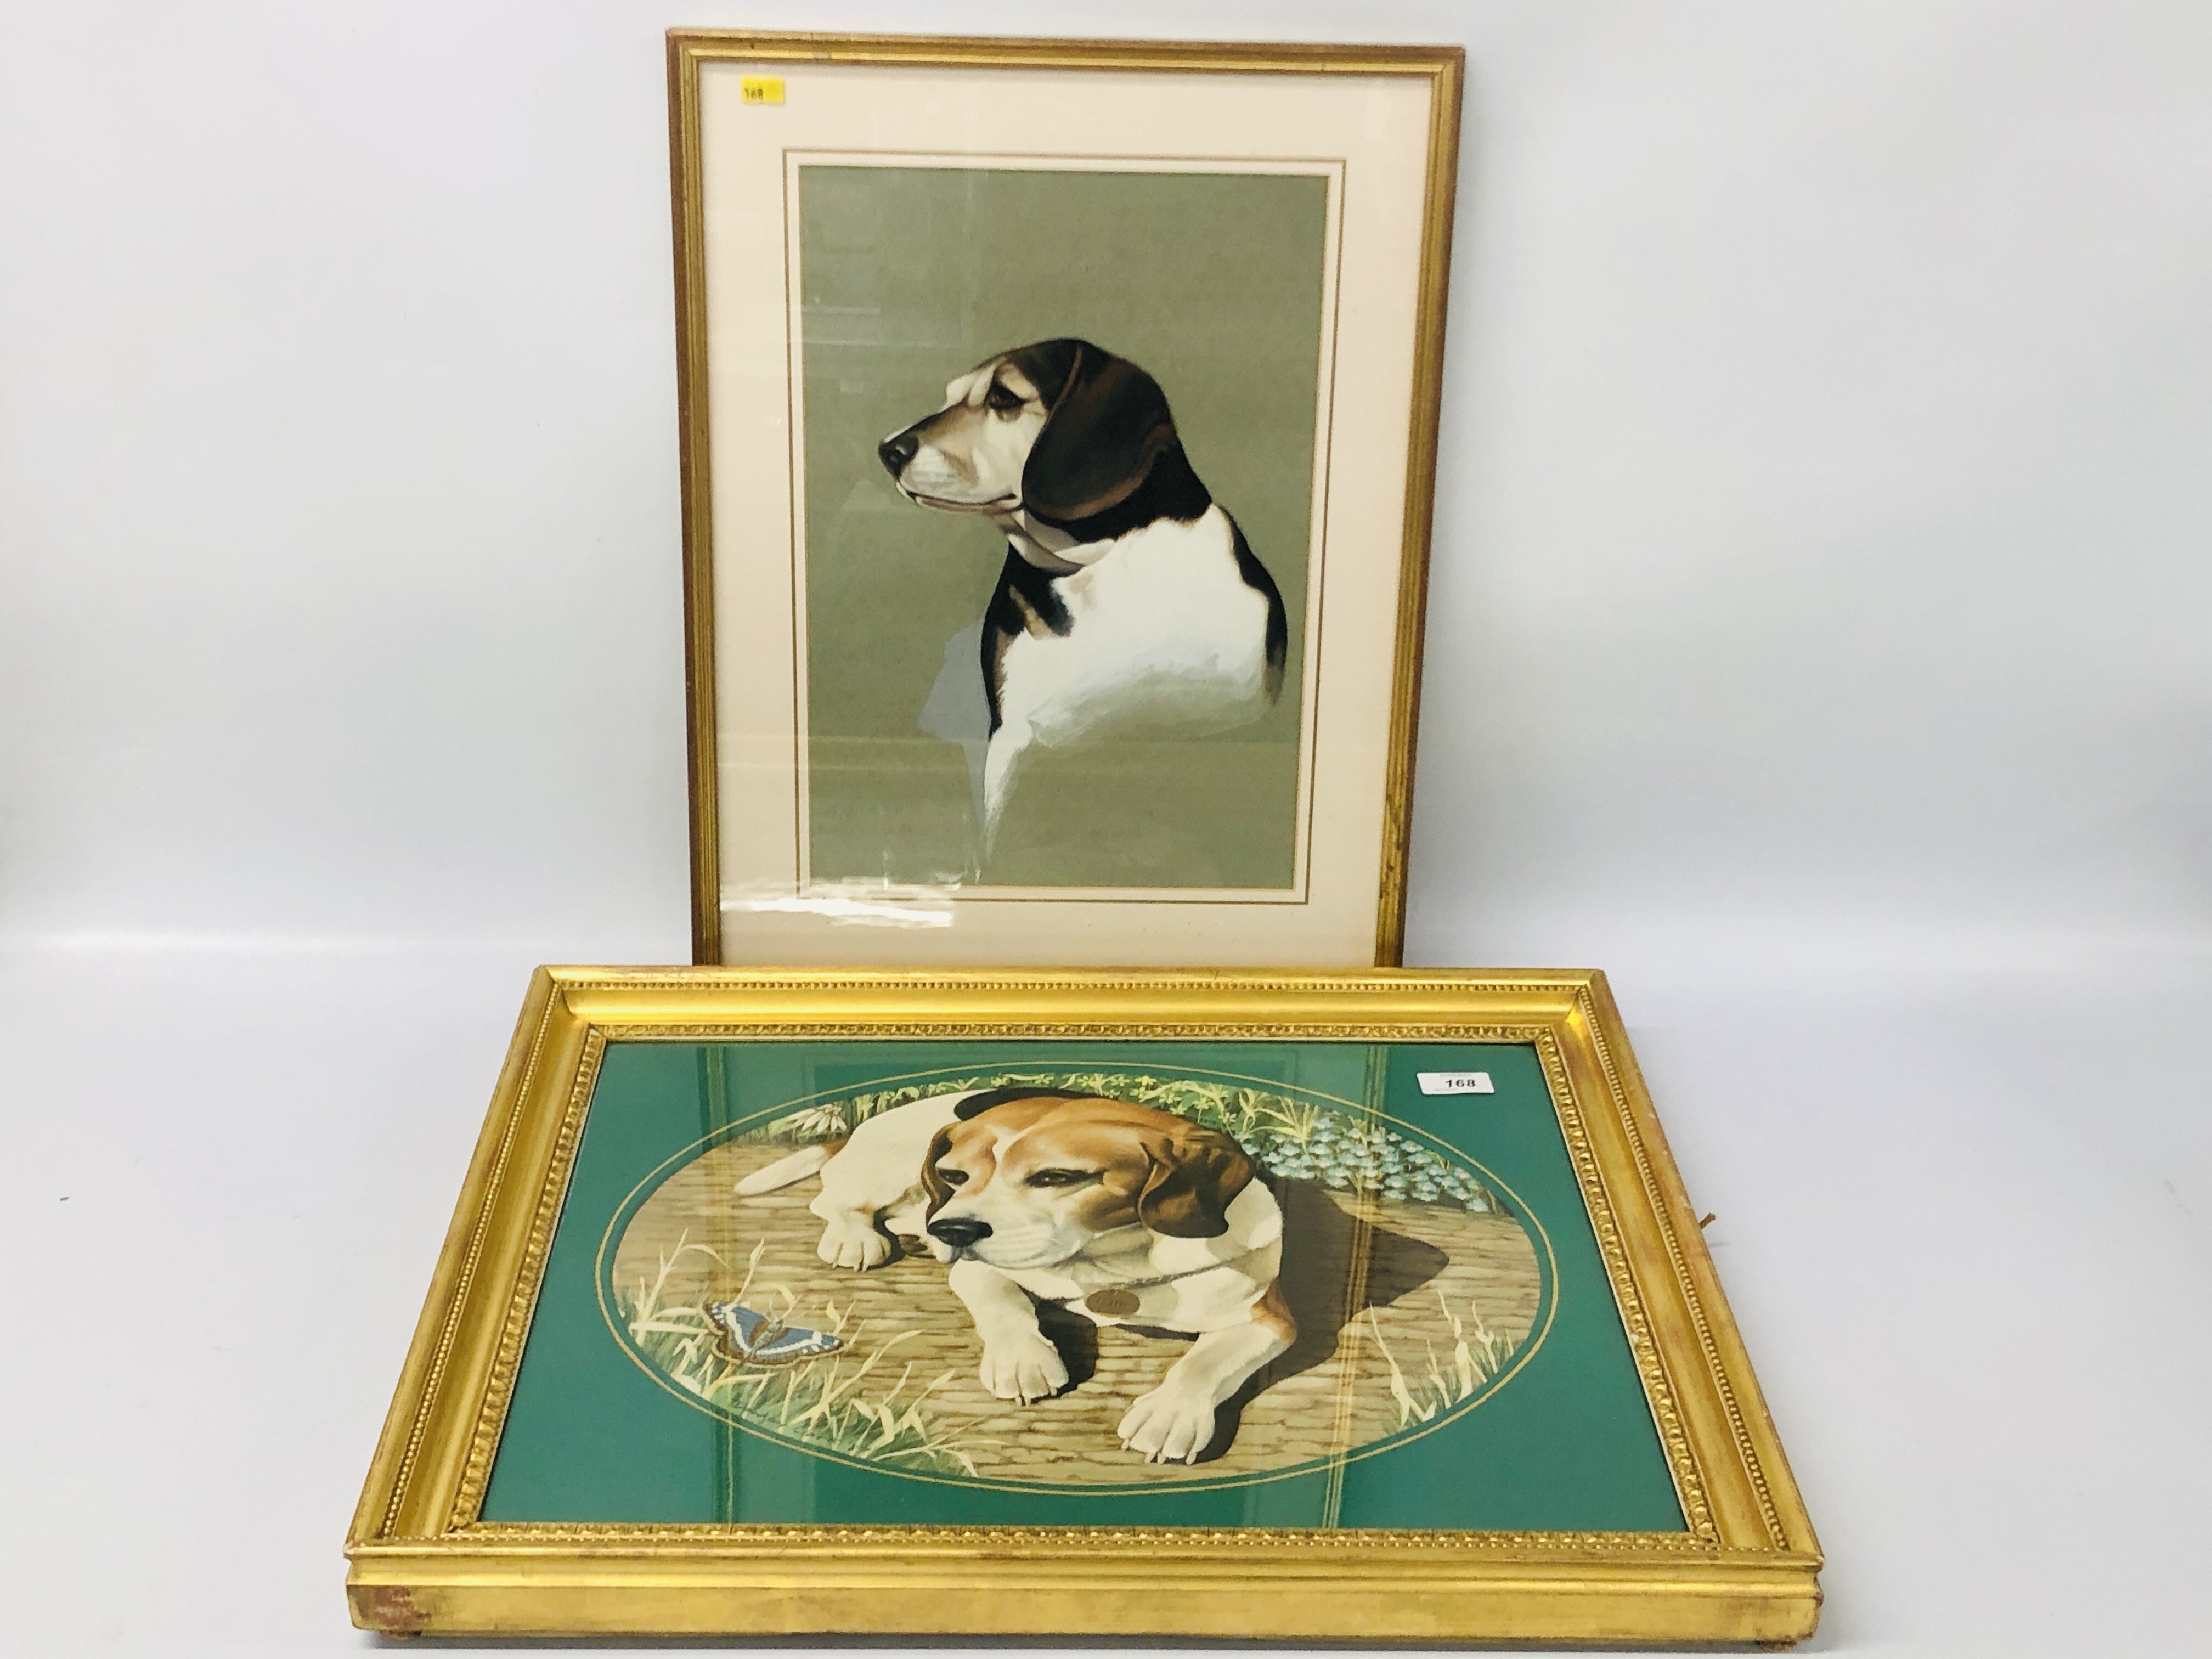 FRAMED OIL OF A BEAGLE "TOBY" IN OVAL MOUNT BEARING SIGNATURE D. CLARK - W 44CM. H 34CM.